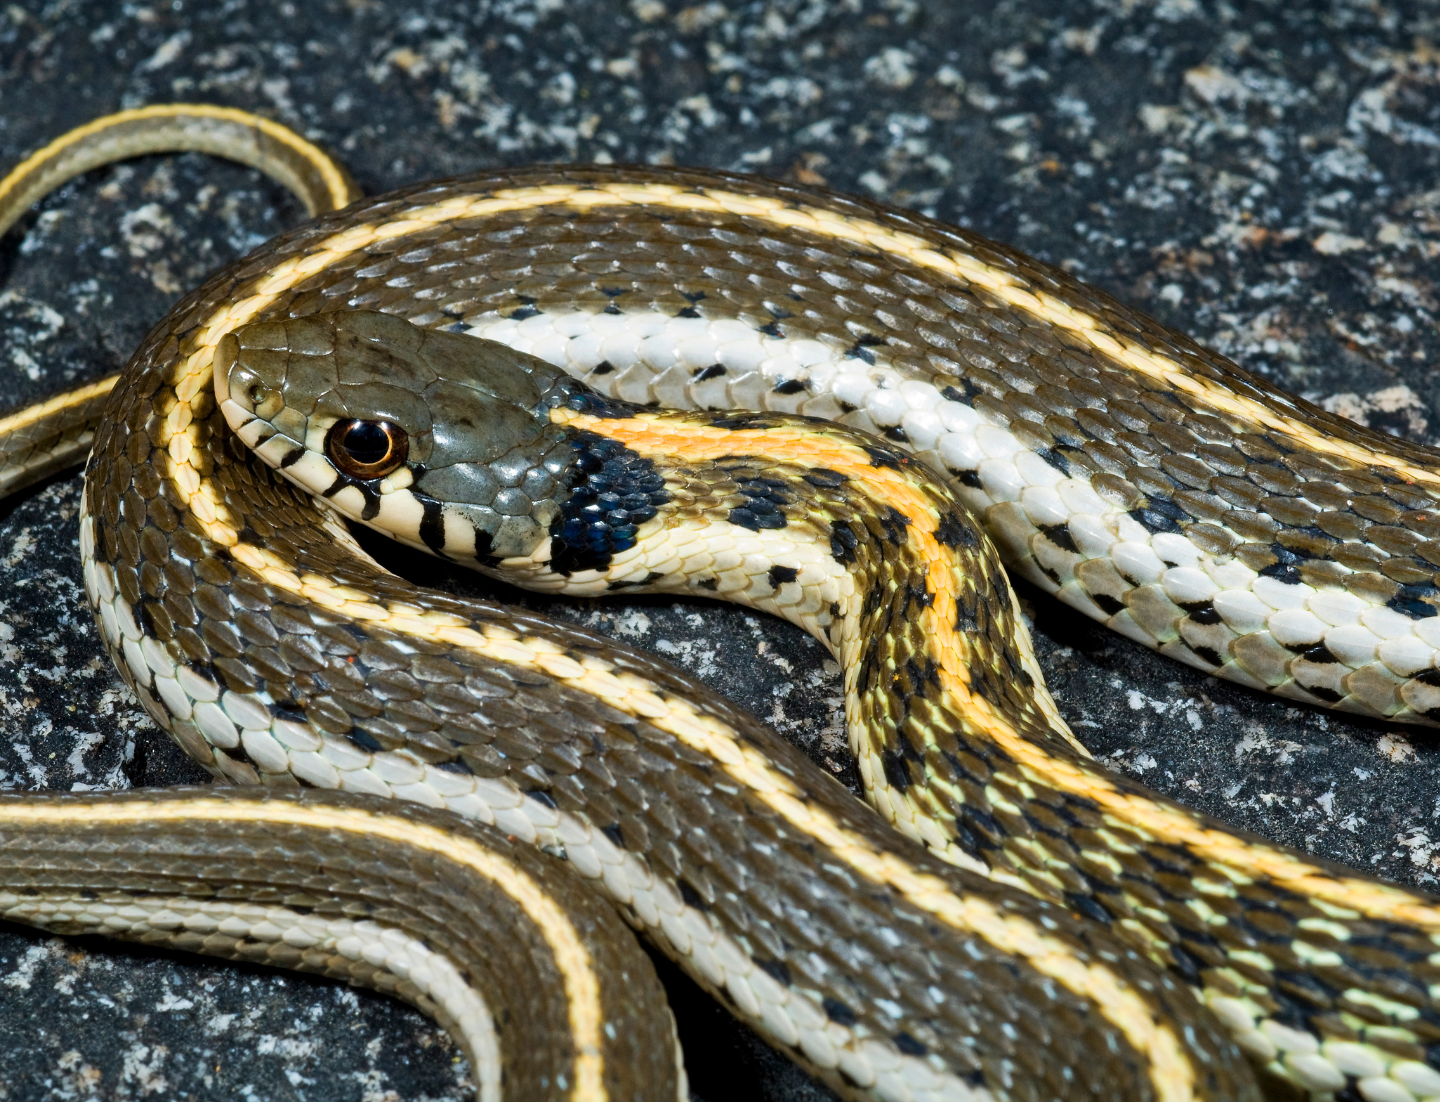 A black-necked garter snake which is slender with a yellow-colored stripe on the top and light-colored sides of an otherwise olive-green body